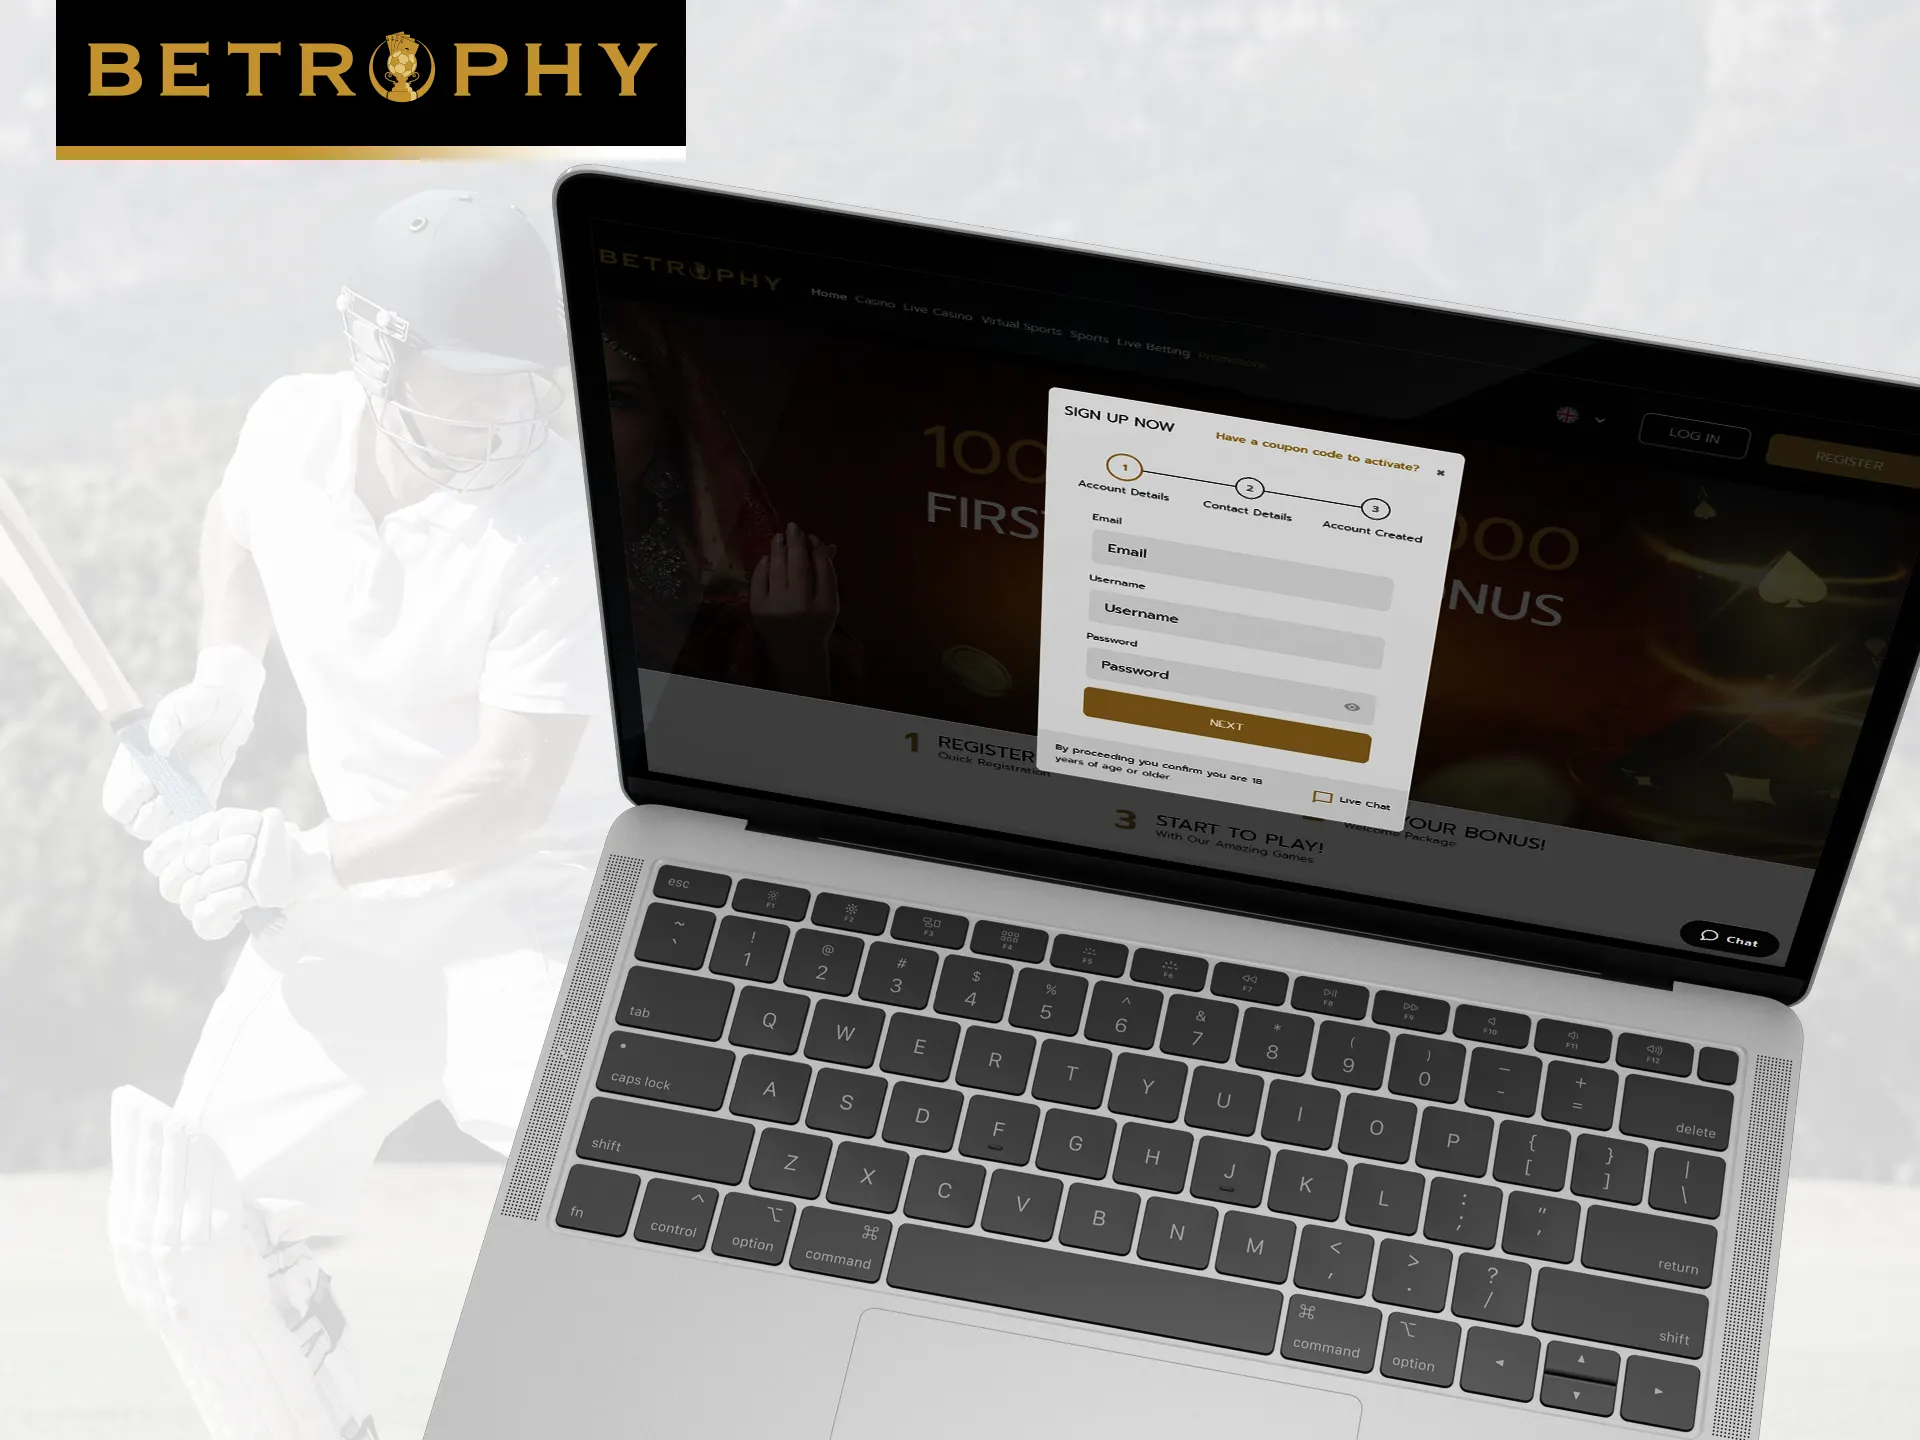 Go through the simple registration process at Betrophy.